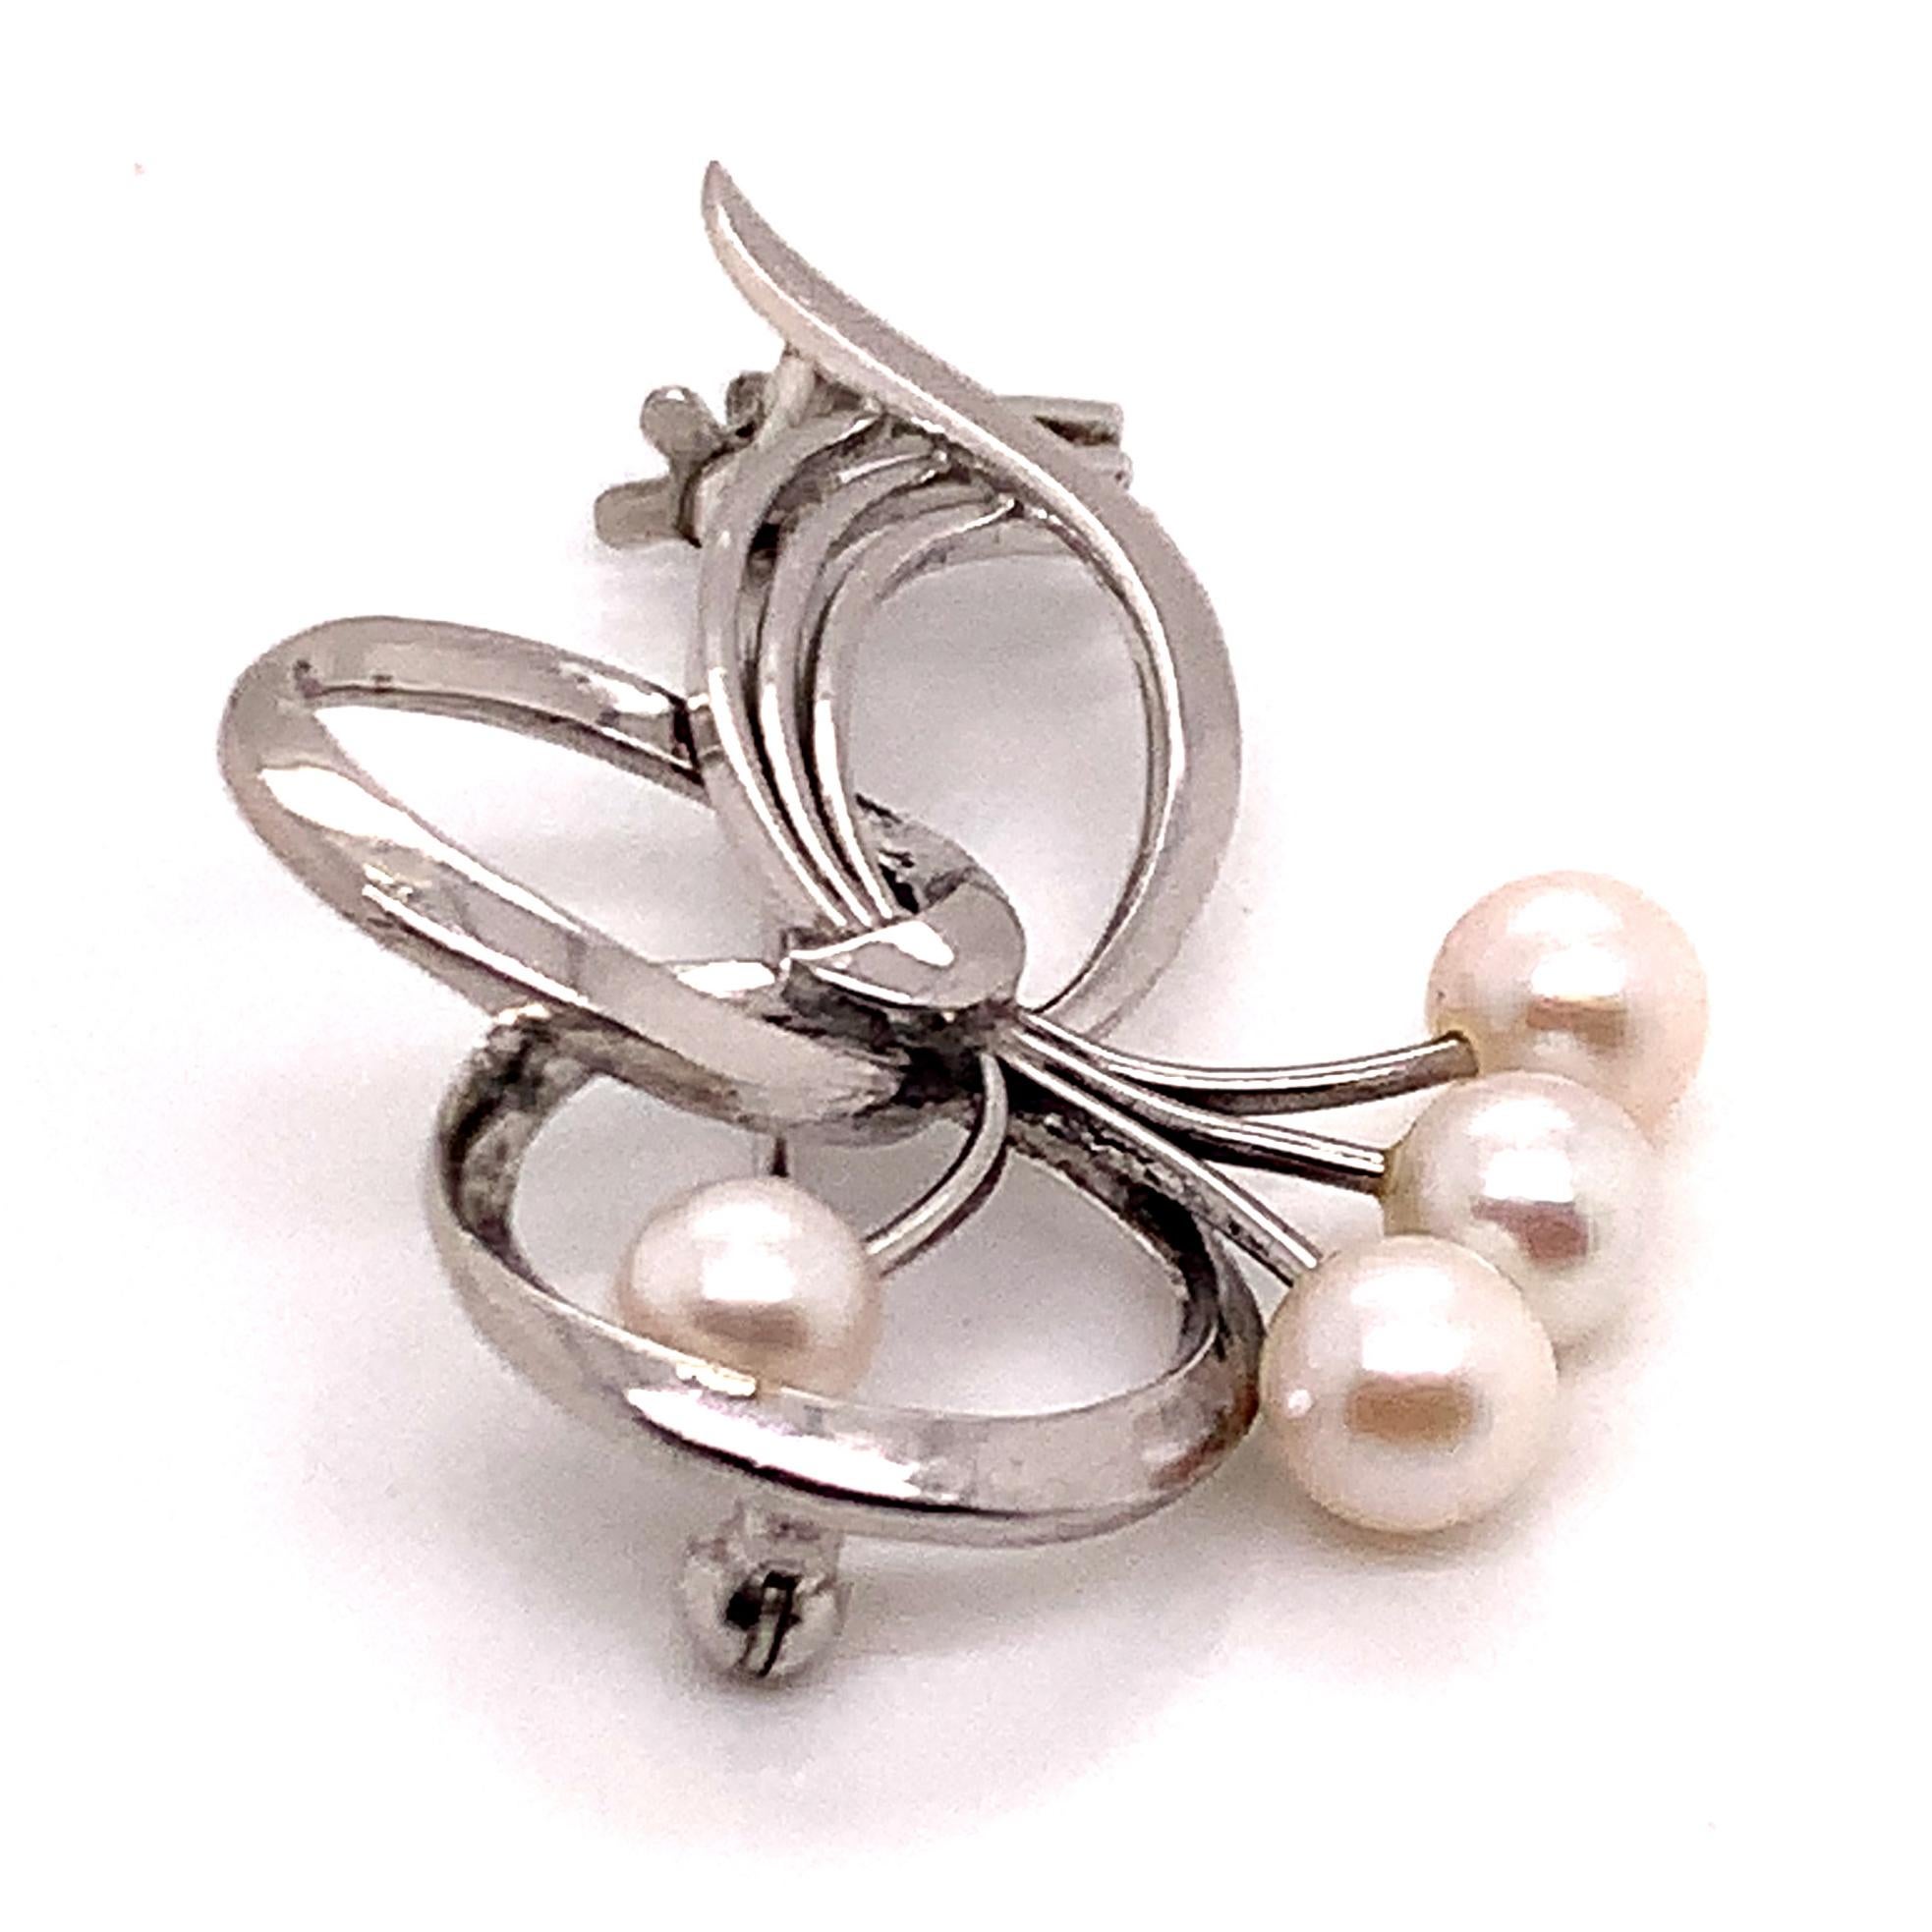 Mikimoto Estate Akoya Pearl Brooch Pin Sterling Silver 5.67 mm M182

This elegant Authentic Mikimoto Estate Akoya pearl brooch pin is made of sterling silver and has 4 Akoya Cultured Pearls in size 5.67 mm.

TRUSTED SELLER SINCE 2002

PLEASE SEE OUR